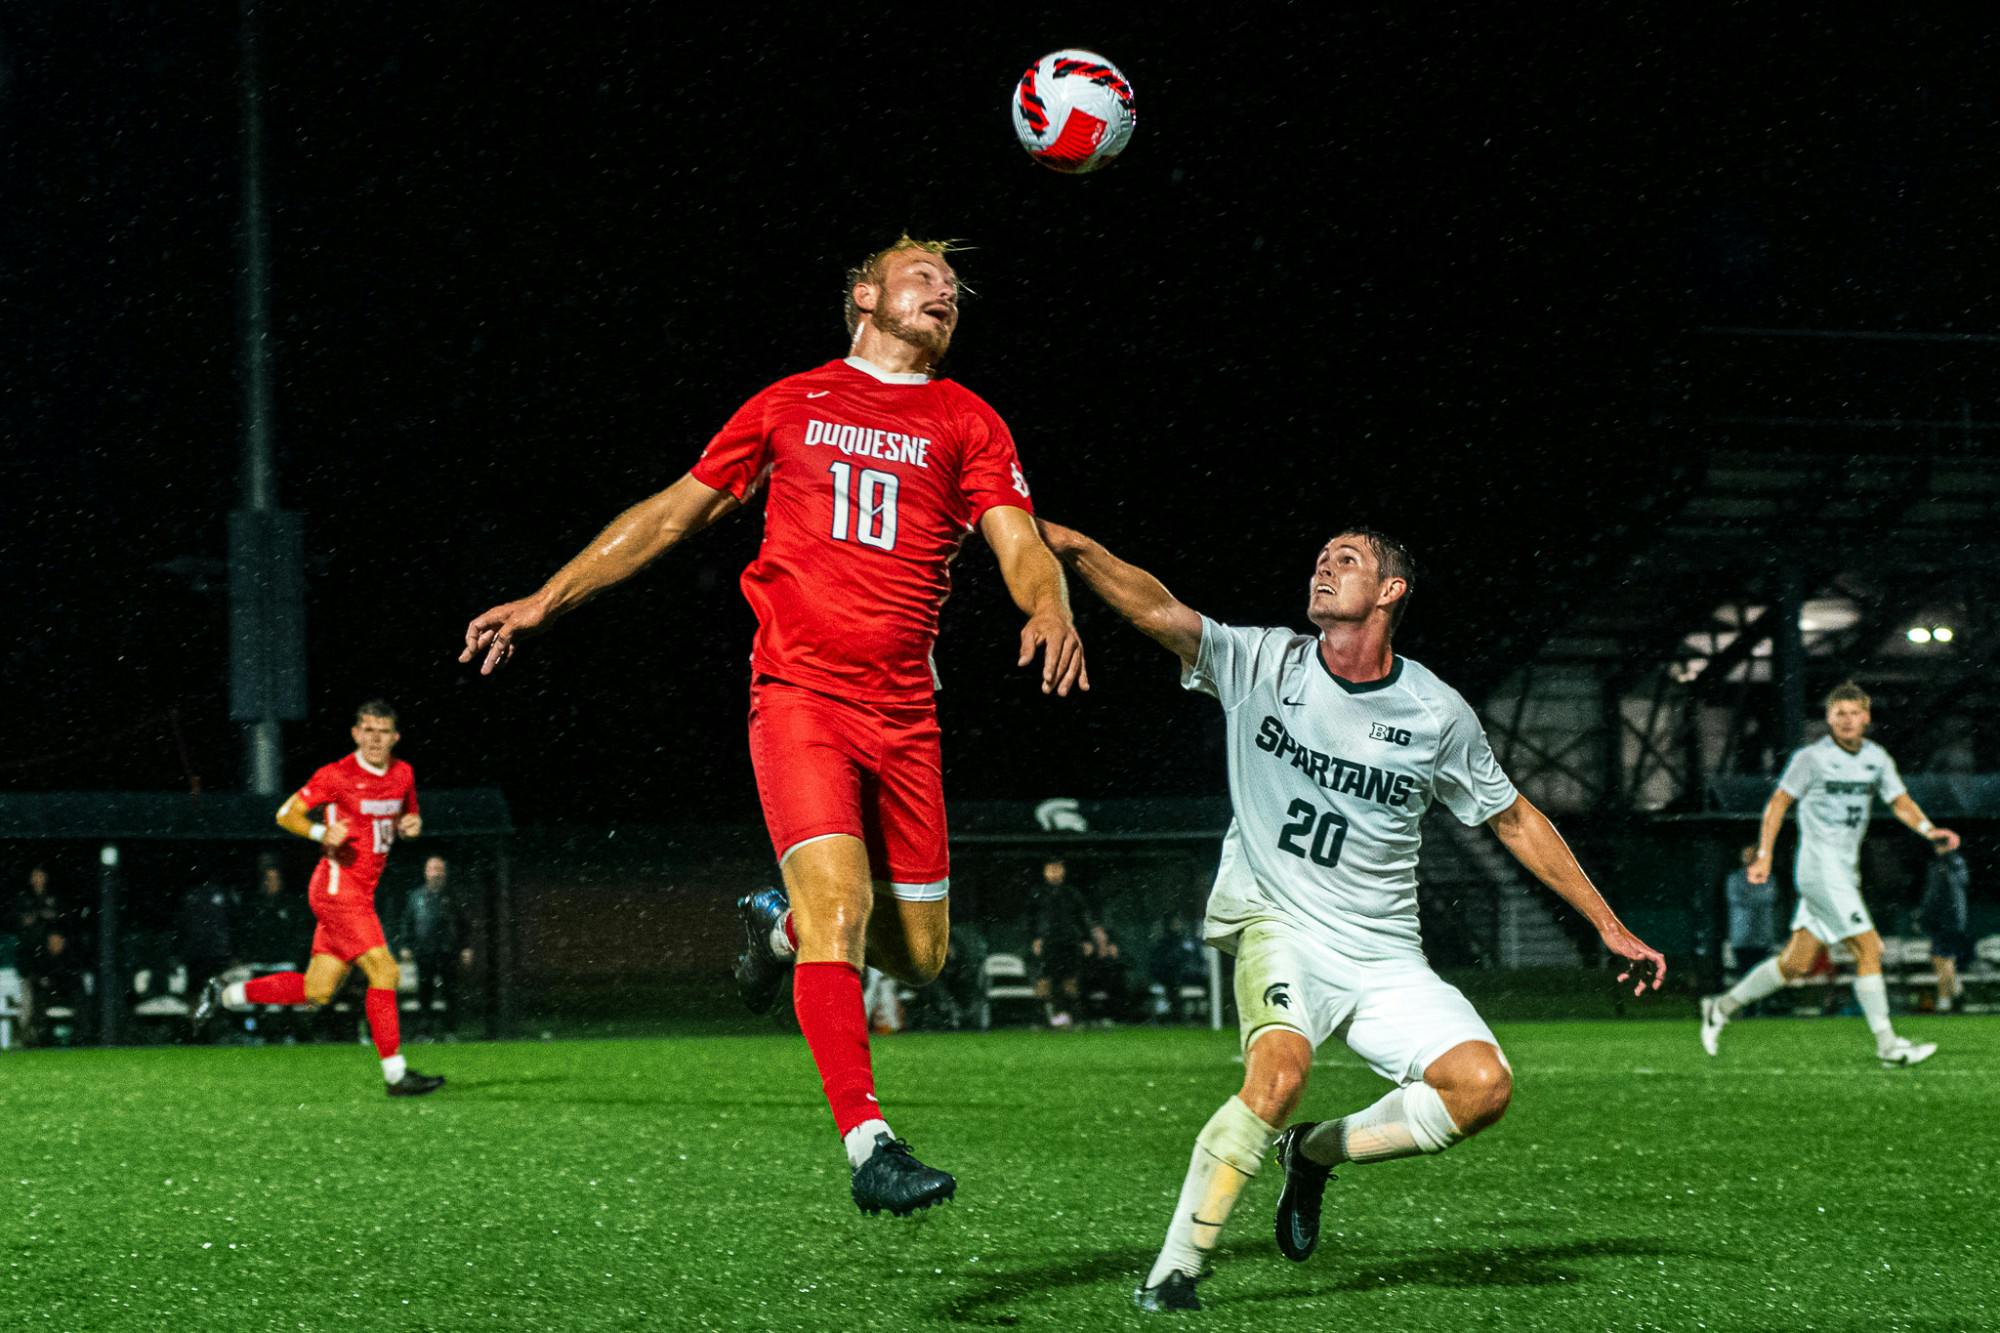 <p>Duquesne freshman forward Joey Belloti intercepts the ball with a header. Michigan State men&#x27;s soccer team defeated Duquesne 1-0 on Sept. 21, 2021 in East Lansing.</p>